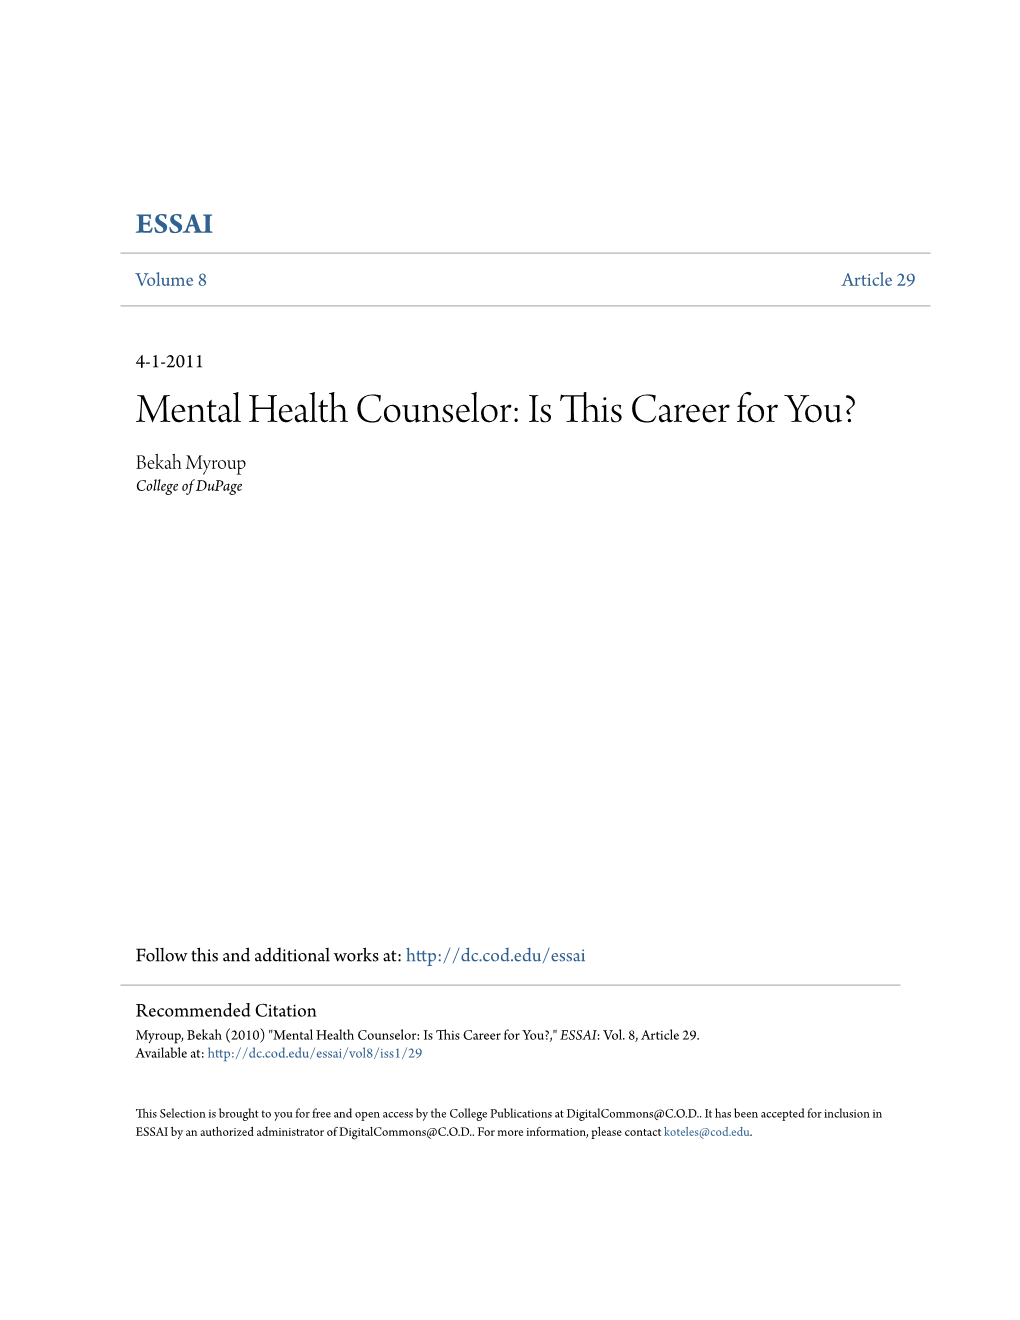 Mental Health Counselor: Is This Career for You? Bekah Myroup College of Dupage